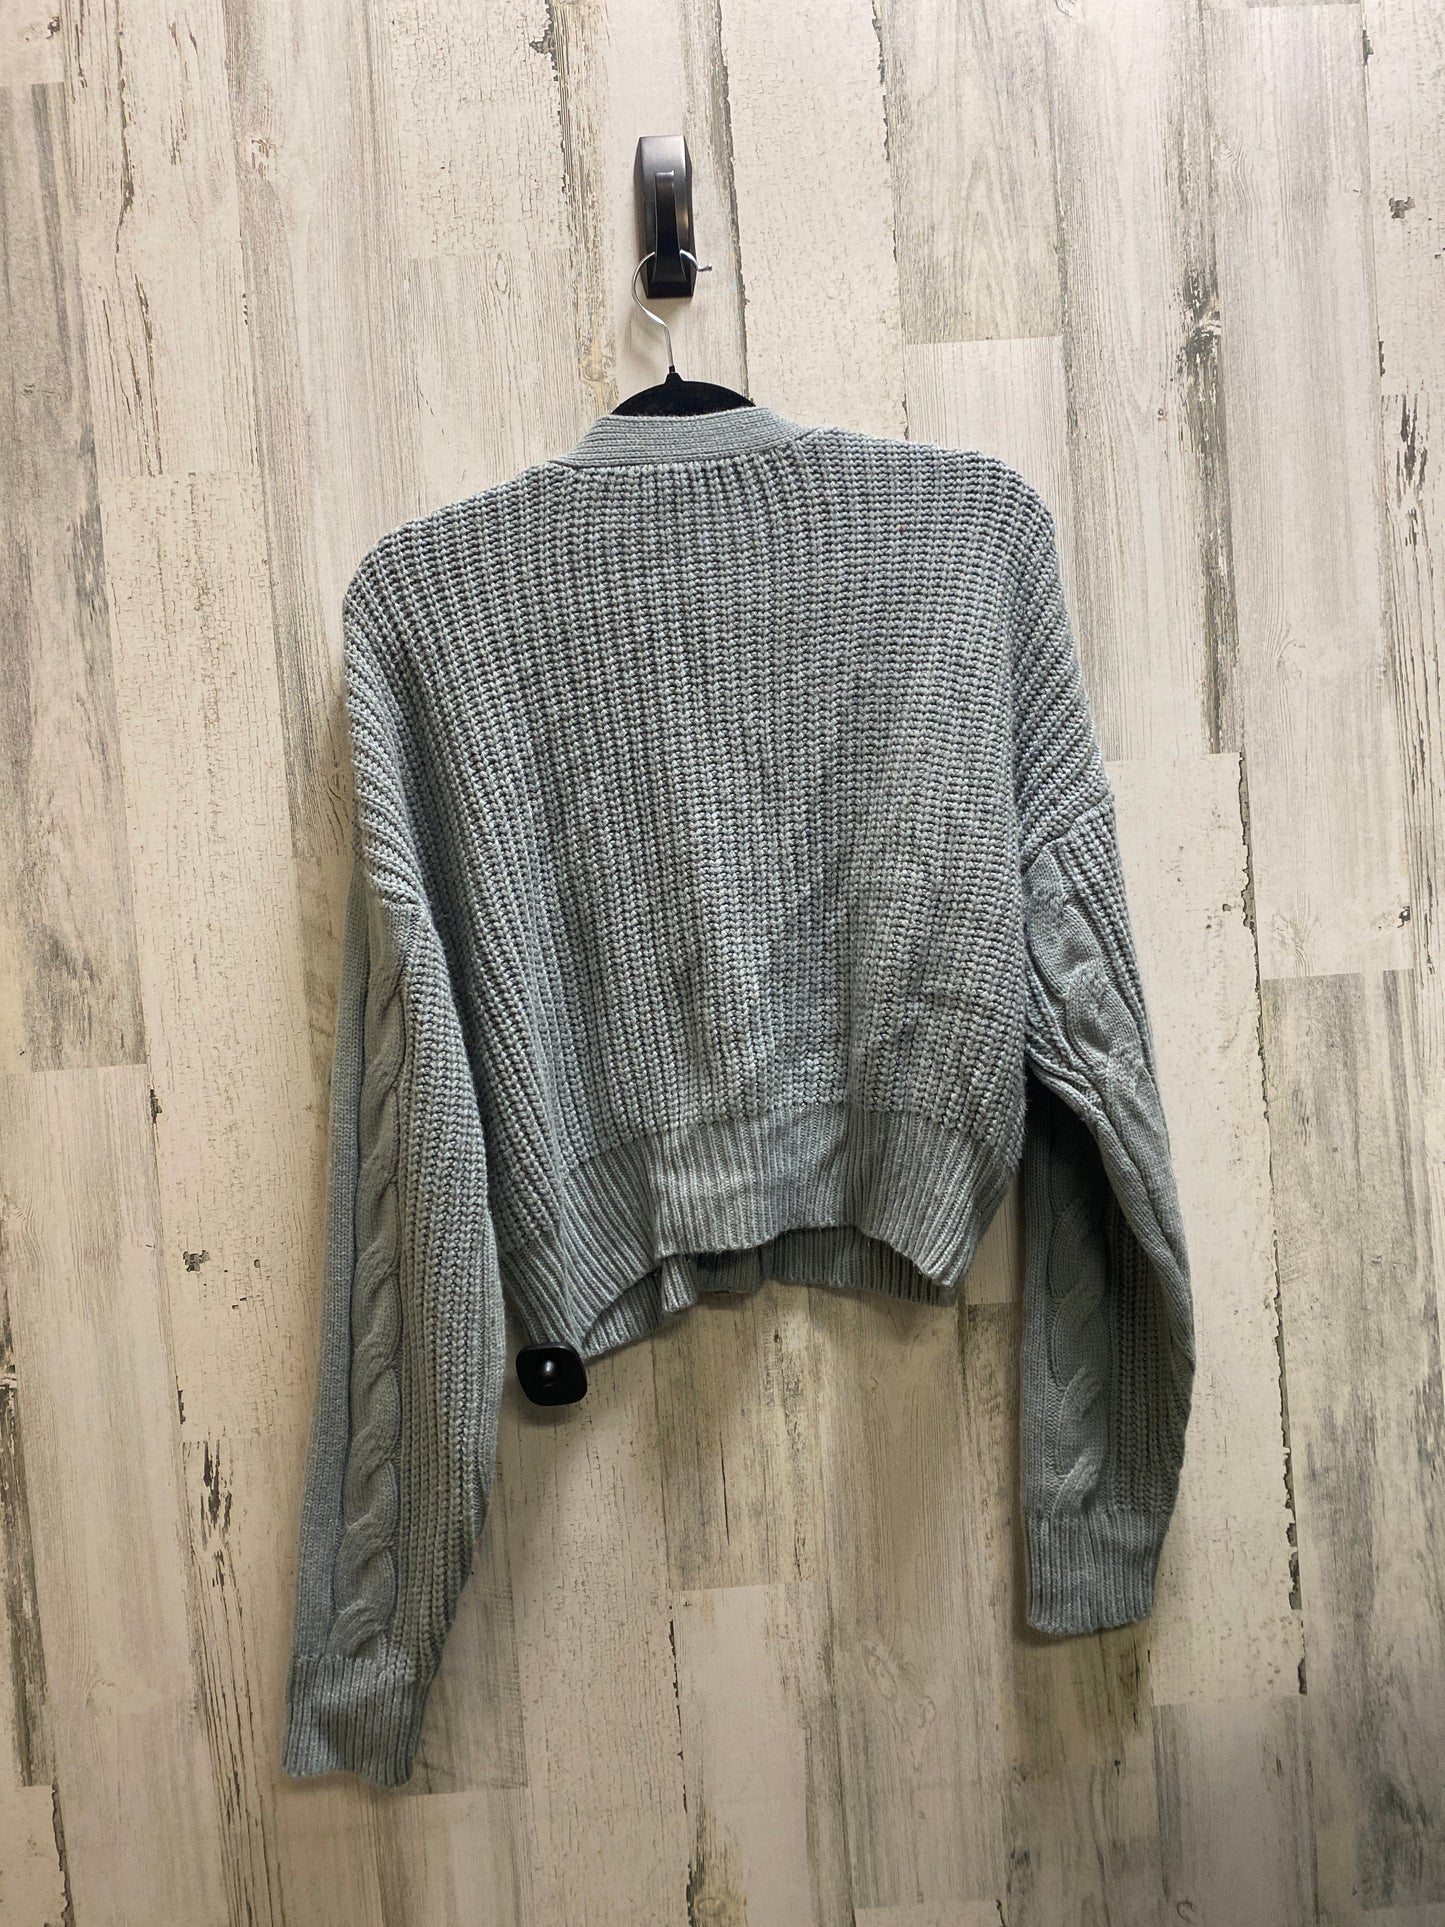 Sweater By Love Tree  Size: M